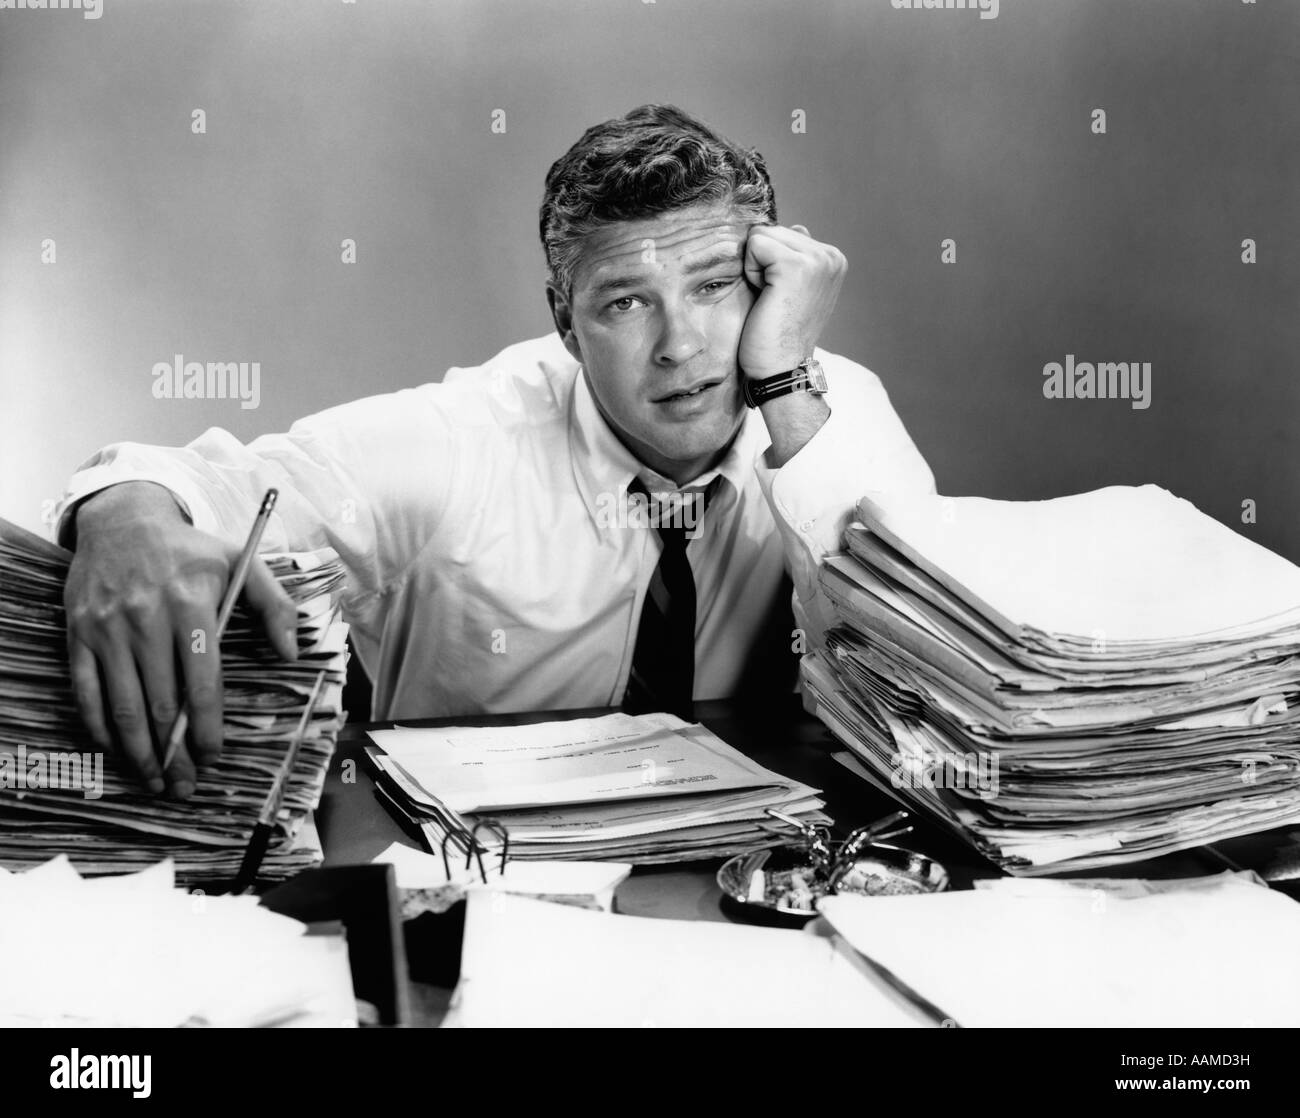 1950s PORTRAIT MAN OVERWORKED WITH DESK FULL OF PAPERS Stock Photo